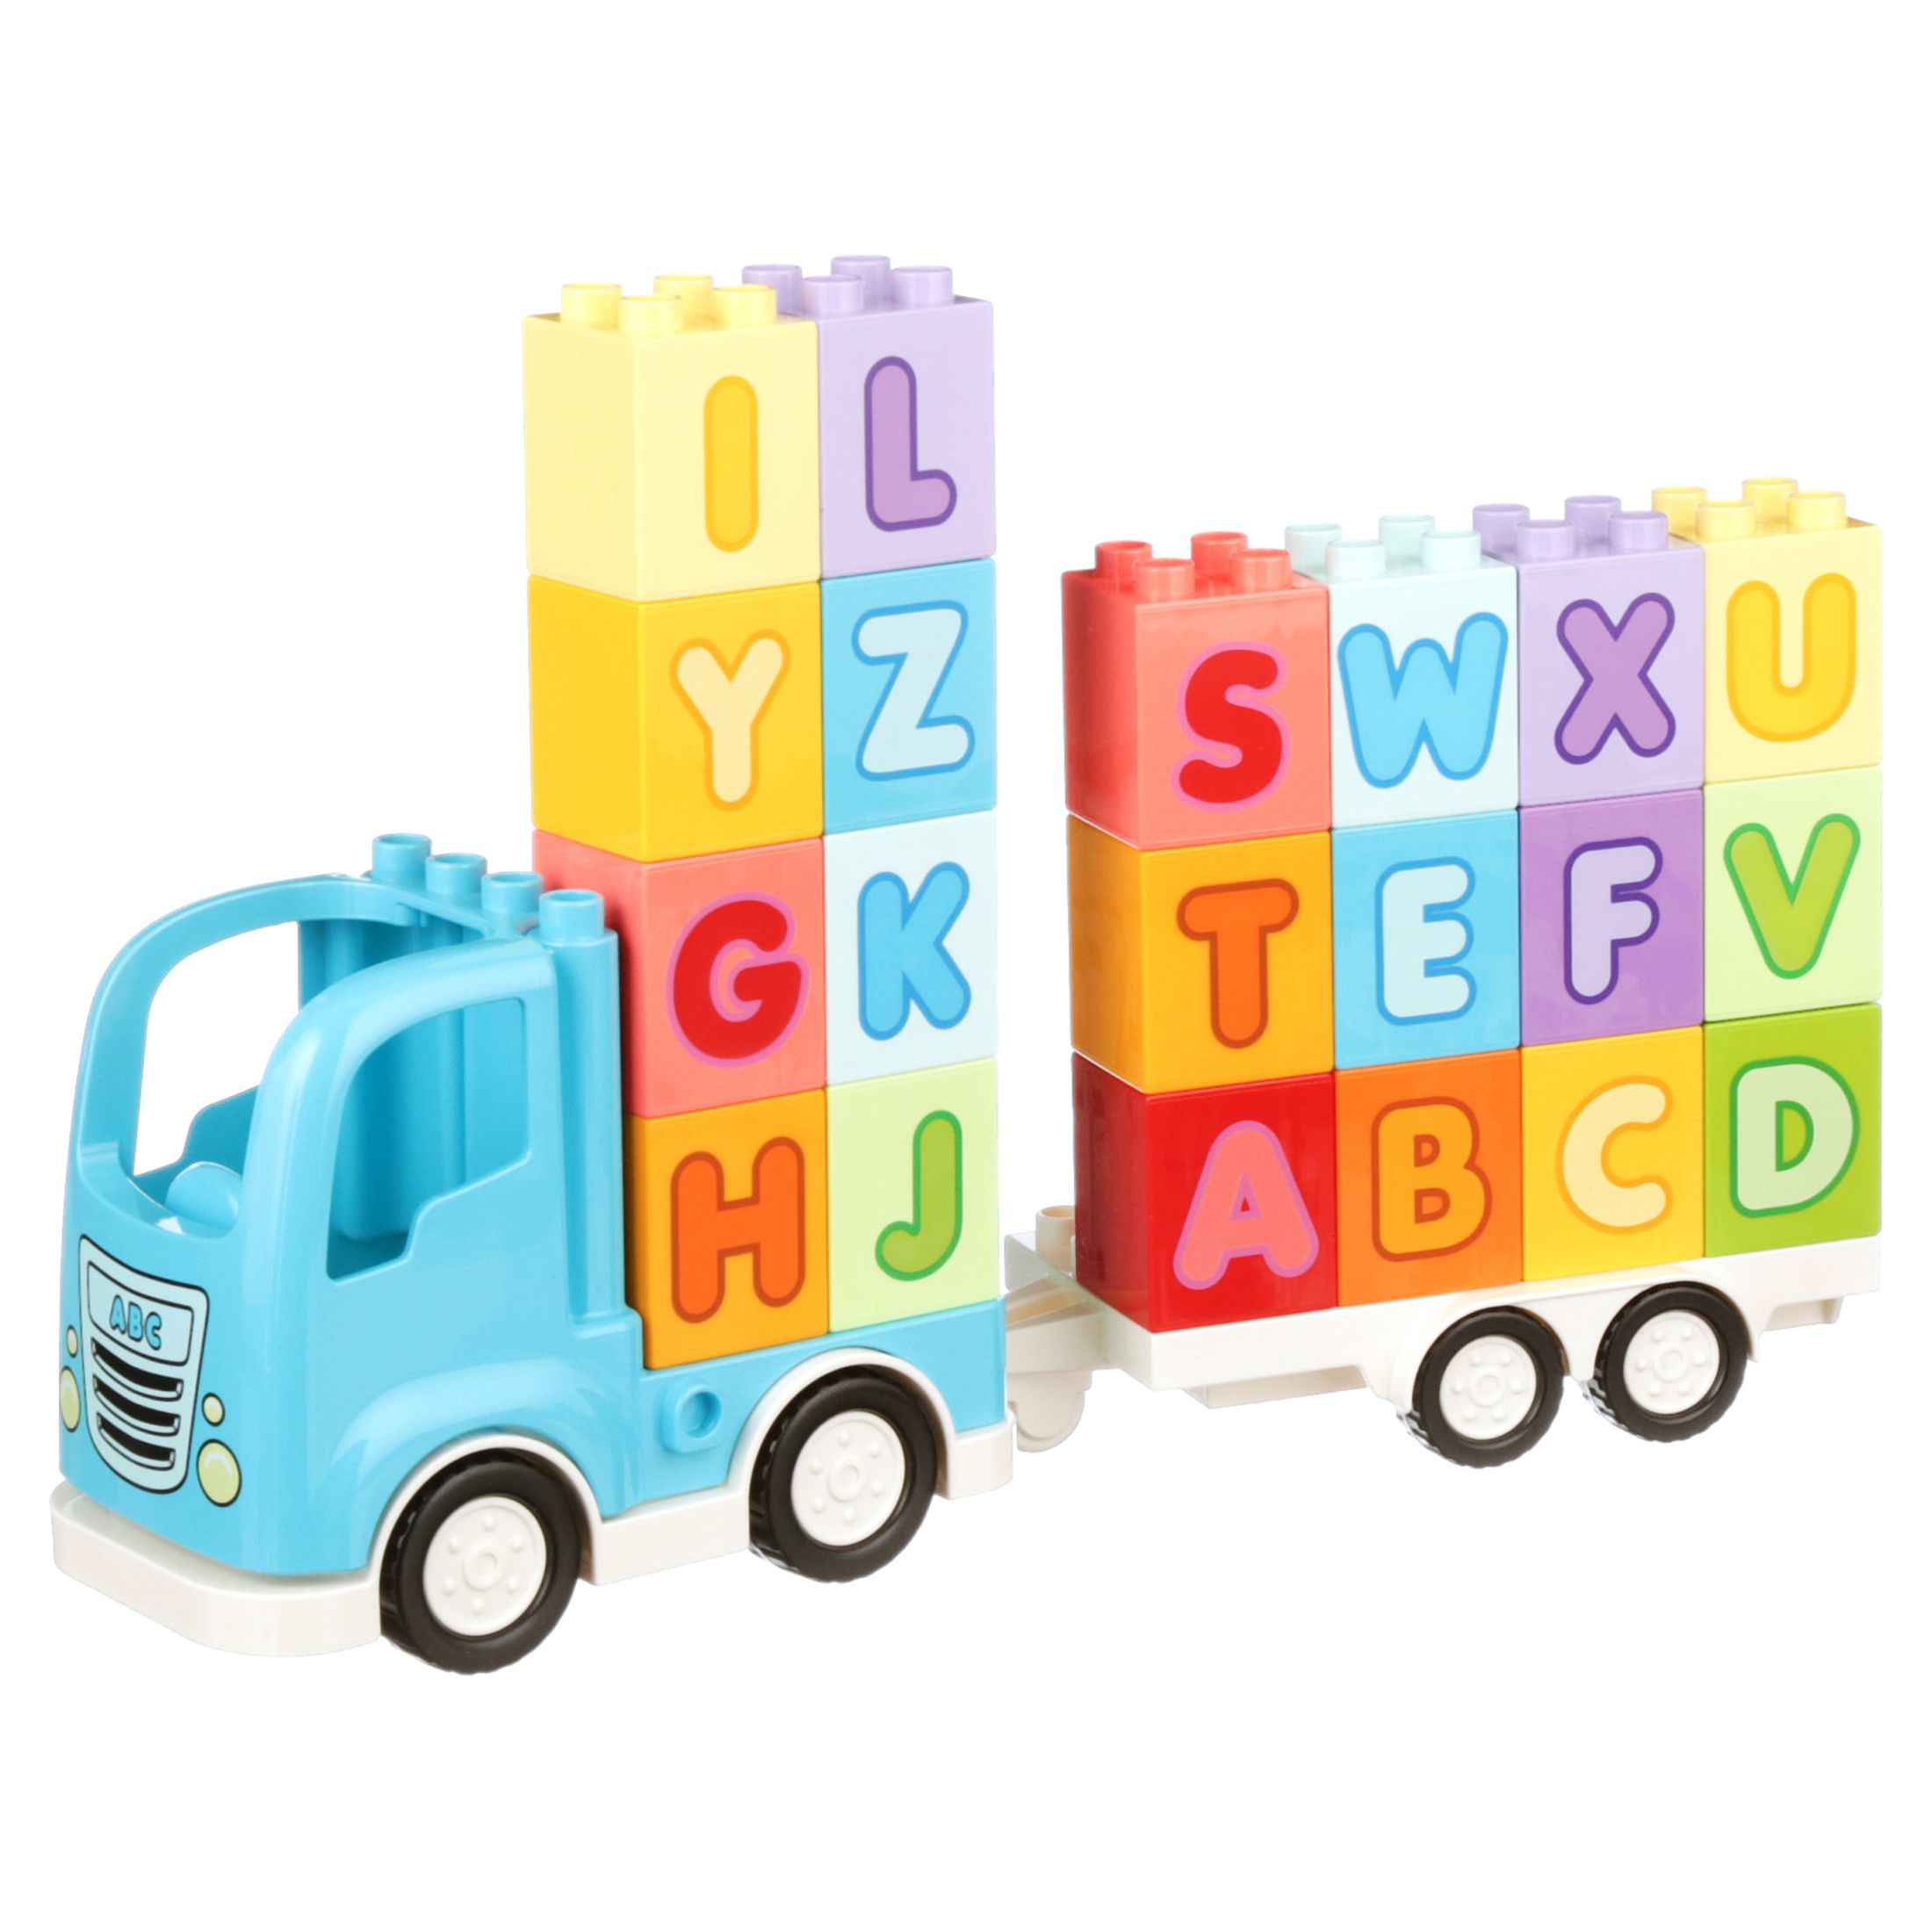 LEGO DUPLO My First Alphabet Truck 10915 Educational Building Toy for Toddlers (36 Pieces) - image 11 of 12